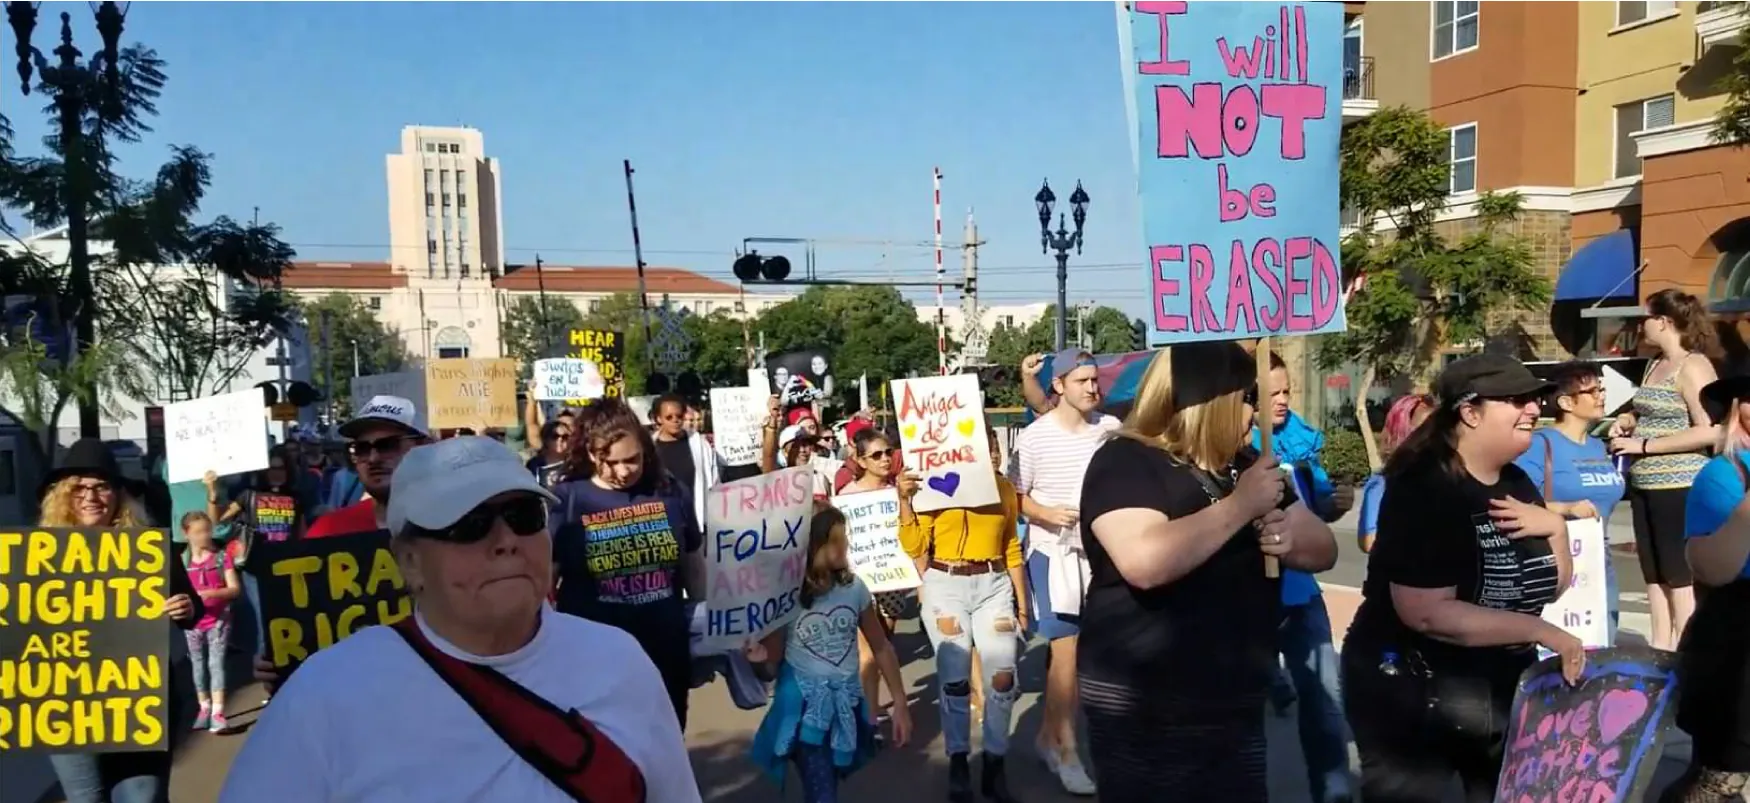 Several hundred protesters can be seen marching downtown in San Diego, California, to support and preserve transgender rights.